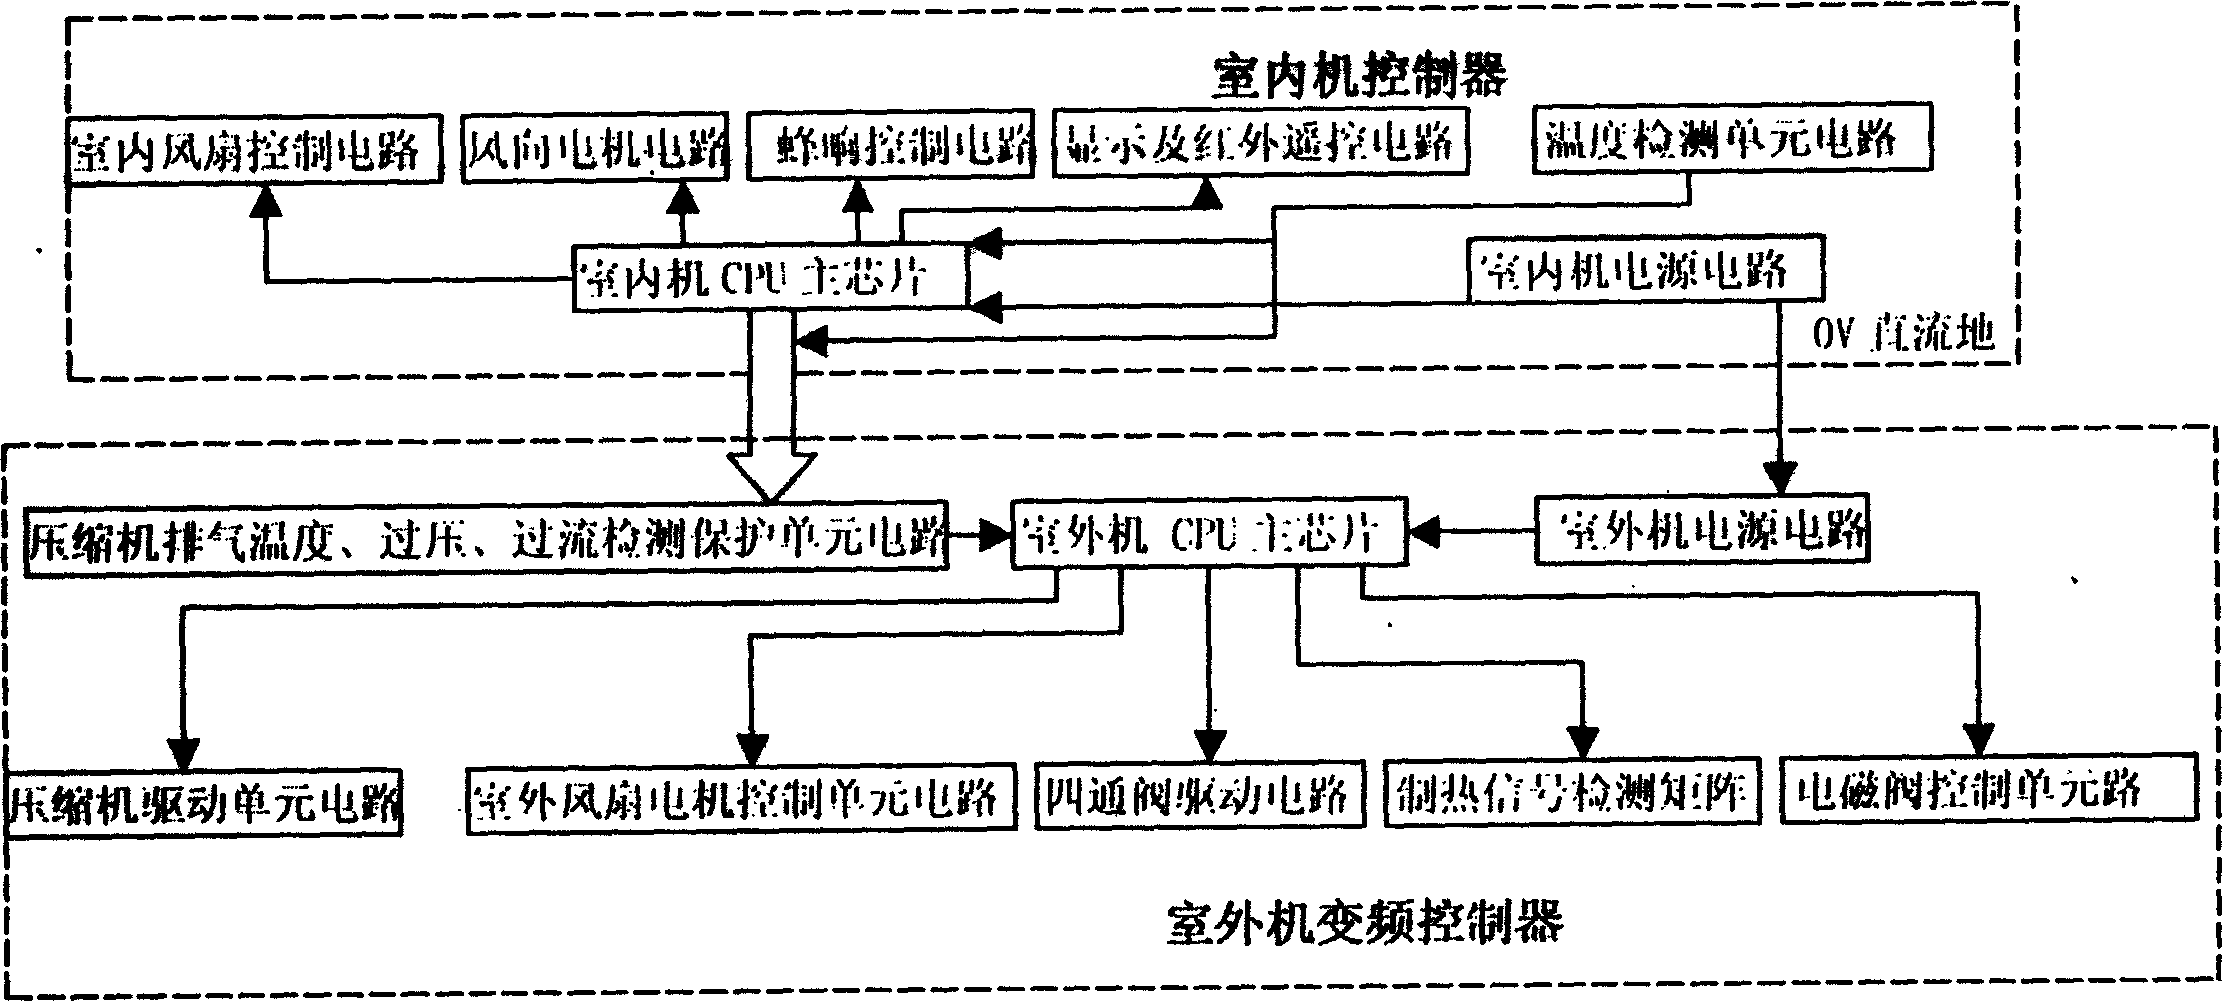 Triple-evaporator air conditioner and variable frequency control method